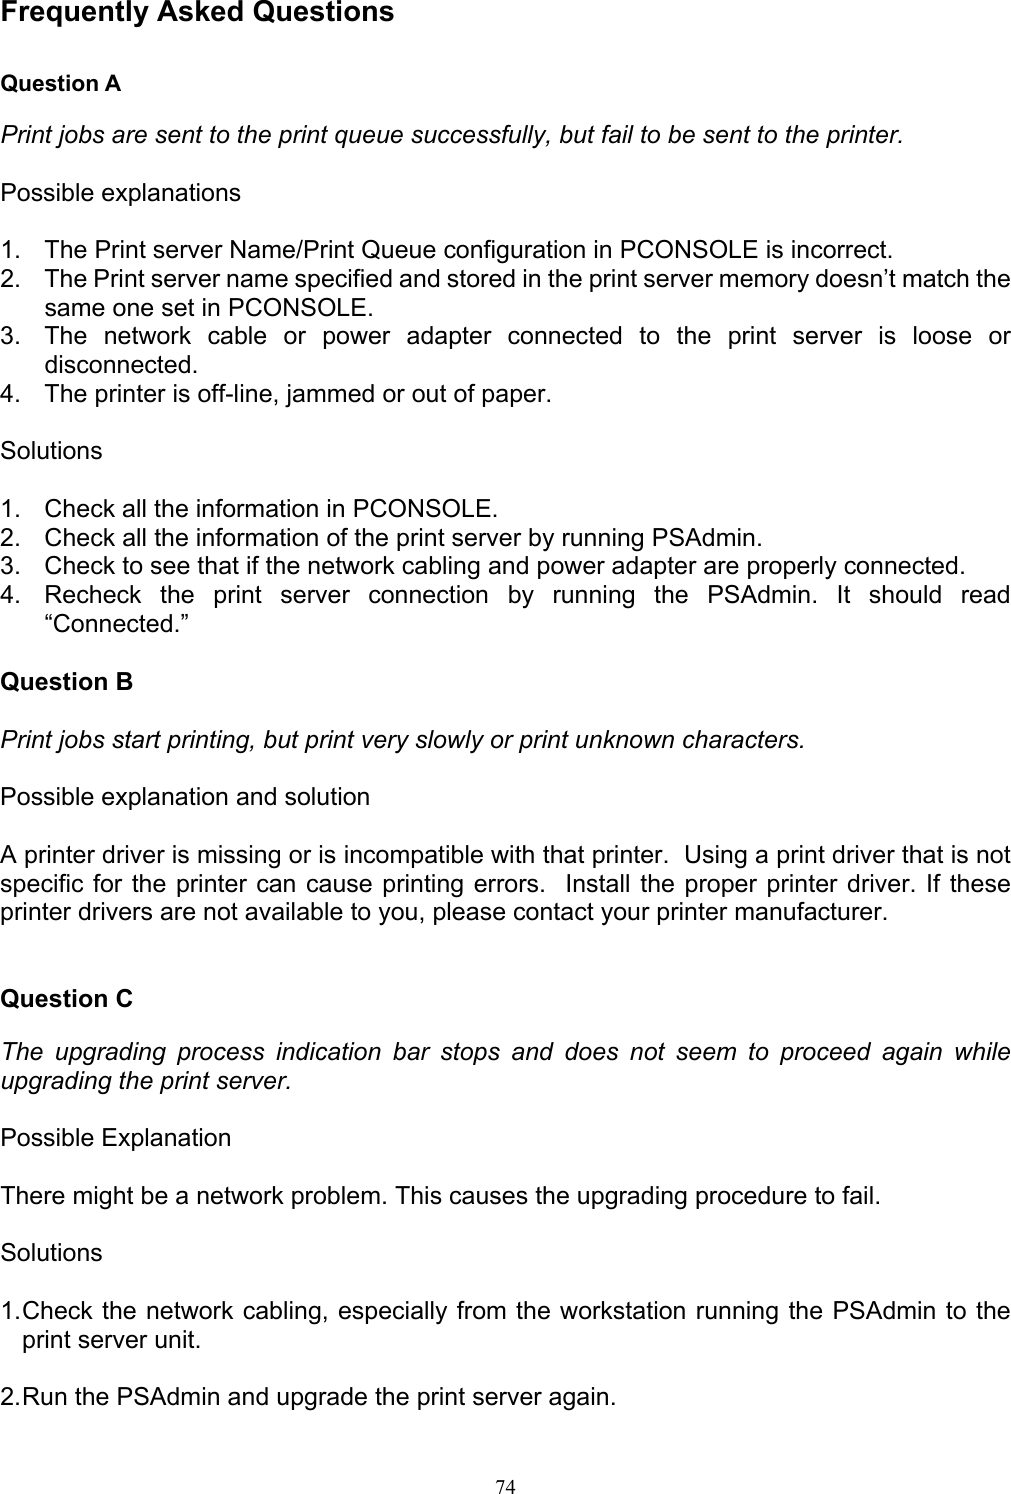   74 Frequently Asked Questions  Question A  Print jobs are sent to the print queue successfully, but fail to be sent to the printer.  Possible explanations  1.  The Print server Name/Print Queue configuration in PCONSOLE is incorrect. 2.  The Print server name specified and stored in the print server memory doesn’t match the same one set in PCONSOLE. 3.  The network cable or power adapter connected to the print server is loose or disconnected. 4.  The printer is off-line, jammed or out of paper.  Solutions  1.  Check all the information in PCONSOLE. 2.  Check all the information of the print server by running PSAdmin. 3.  Check to see that if the network cabling and power adapter are properly connected. 4.  Recheck the print server connection by running the PSAdmin. It should read “Connected.”  Question B  Print jobs start printing, but print very slowly or print unknown characters.  Possible explanation and solution  A printer driver is missing or is incompatible with that printer.  Using a print driver that is not specific for the printer can cause printing errors.  Install the proper printer driver. If these printer drivers are not available to you, please contact your printer manufacturer.   Question C  The upgrading process indication bar stops and does not seem to proceed again while upgrading the print server.  Possible Explanation  There might be a network problem. This causes the upgrading procedure to fail.  Solutions  1. Check the network cabling, especially from the workstation running the PSAdmin to the print server unit.  2. Run the PSAdmin and upgrade the print server again. 